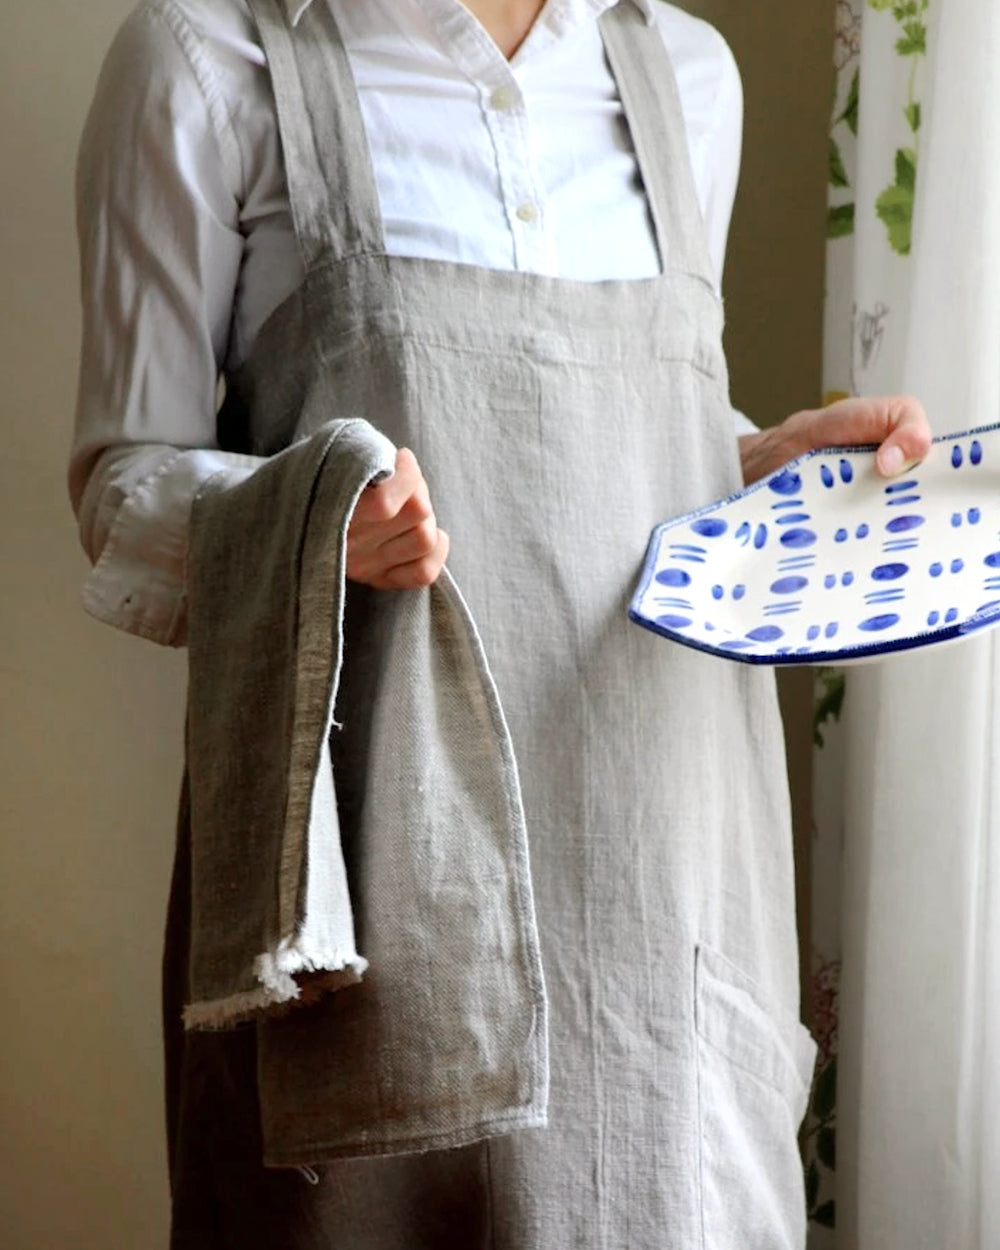 Person holding plate and dish towel wearing natural stone-washed linen apron